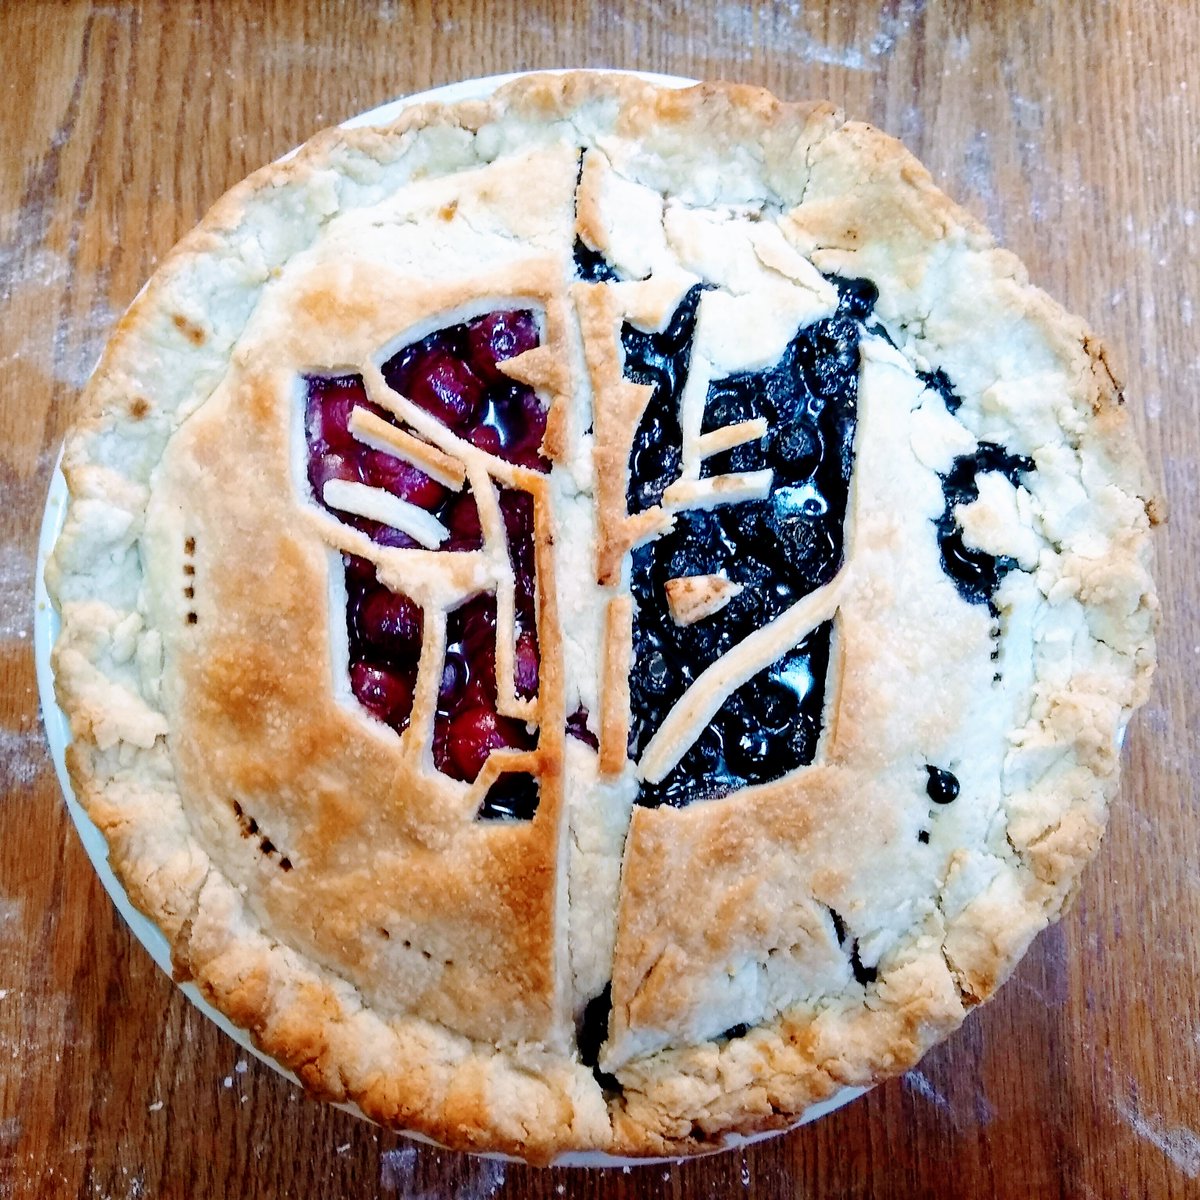 I was not feeling particularly patriotic this #FourthOfJuly until this idea for a red, white, and blue (er, purple) pie occurred to me...

#Transformers #Pie #TillAllAreOne